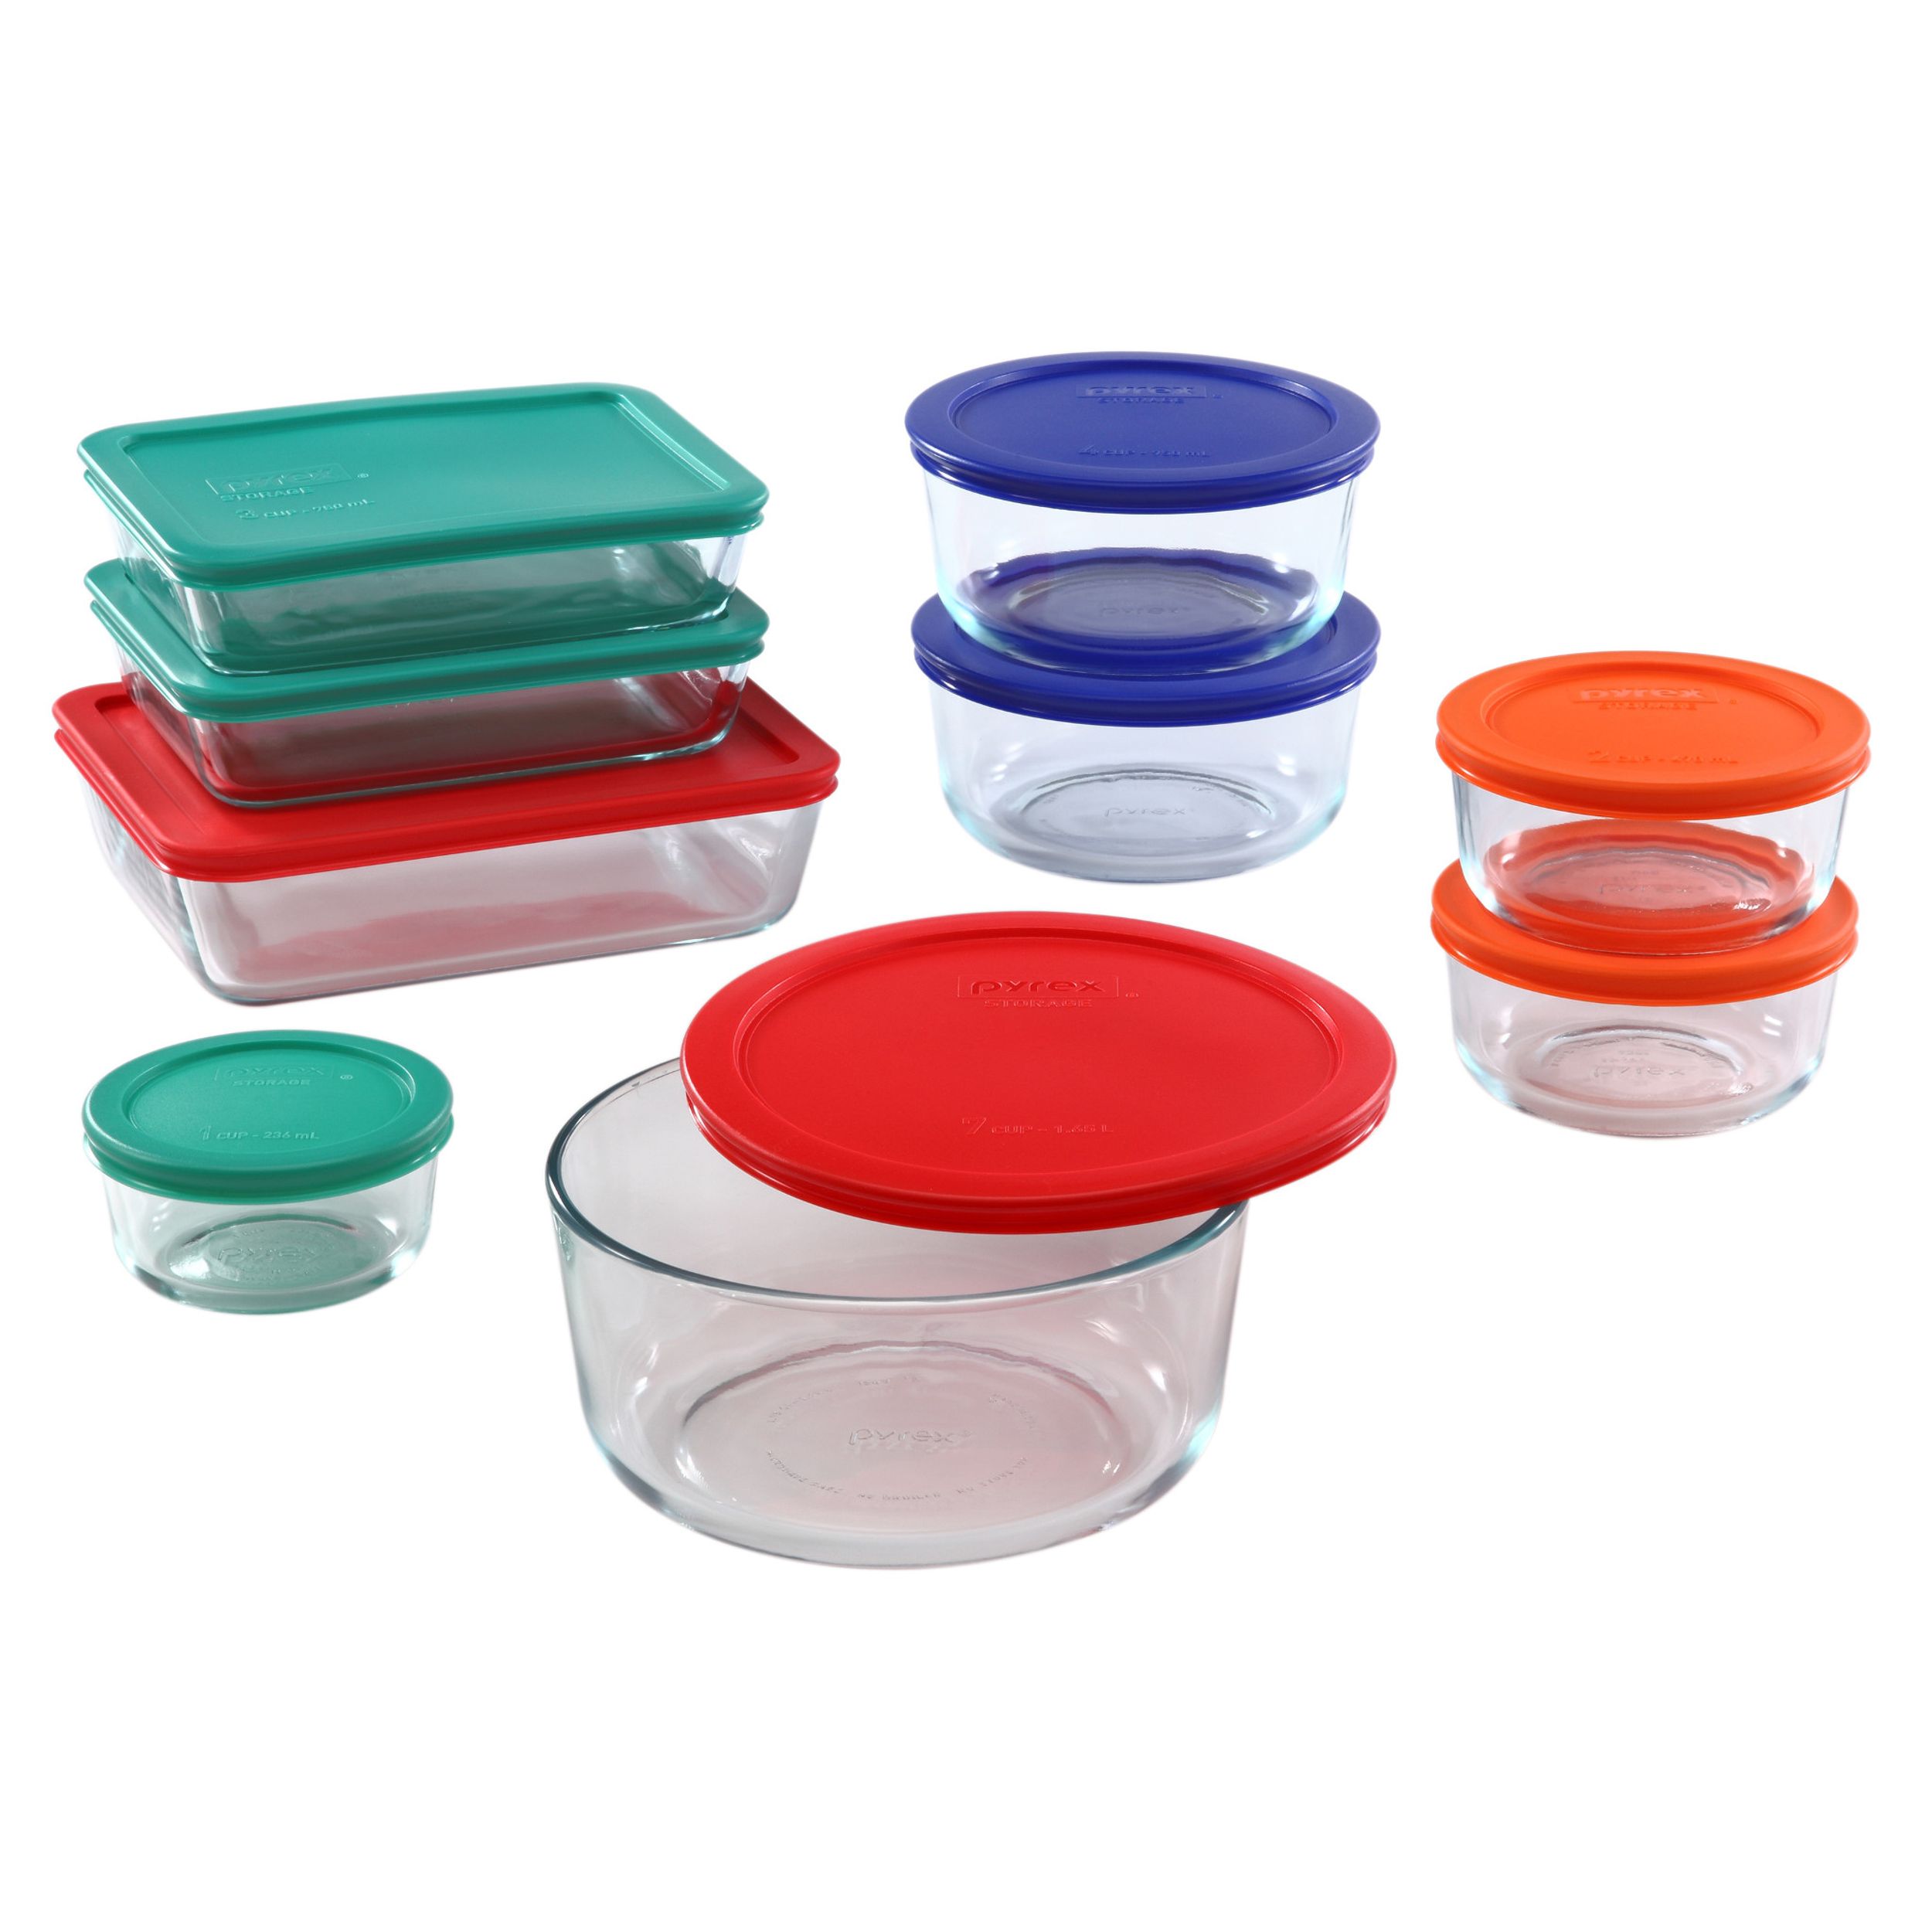 Pyrex 18-piece Glass Food Storage Container Set with Lids - image 2 of 9